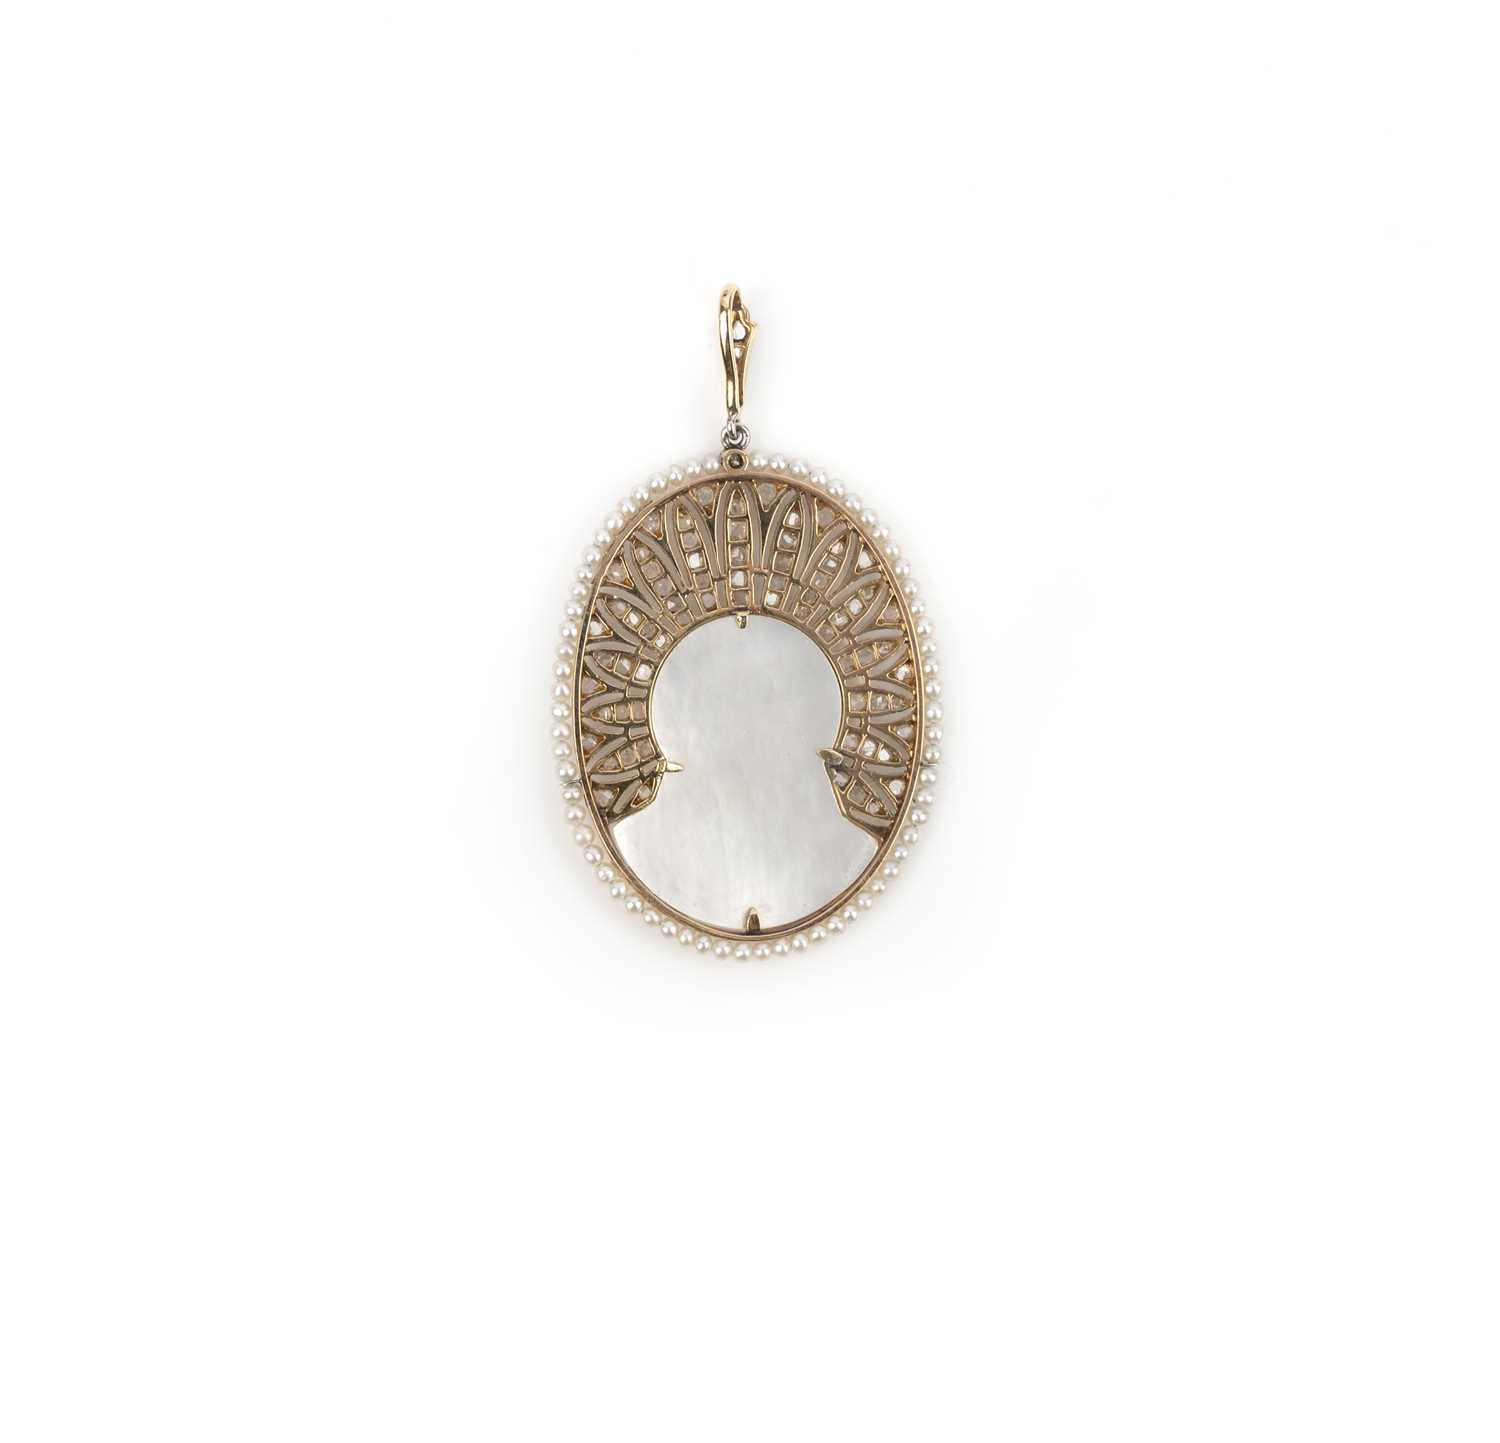 A Belle Epoque mother of pearl, seed pearl and diamond pendant, circa 1900, set with a section of - Image 2 of 2